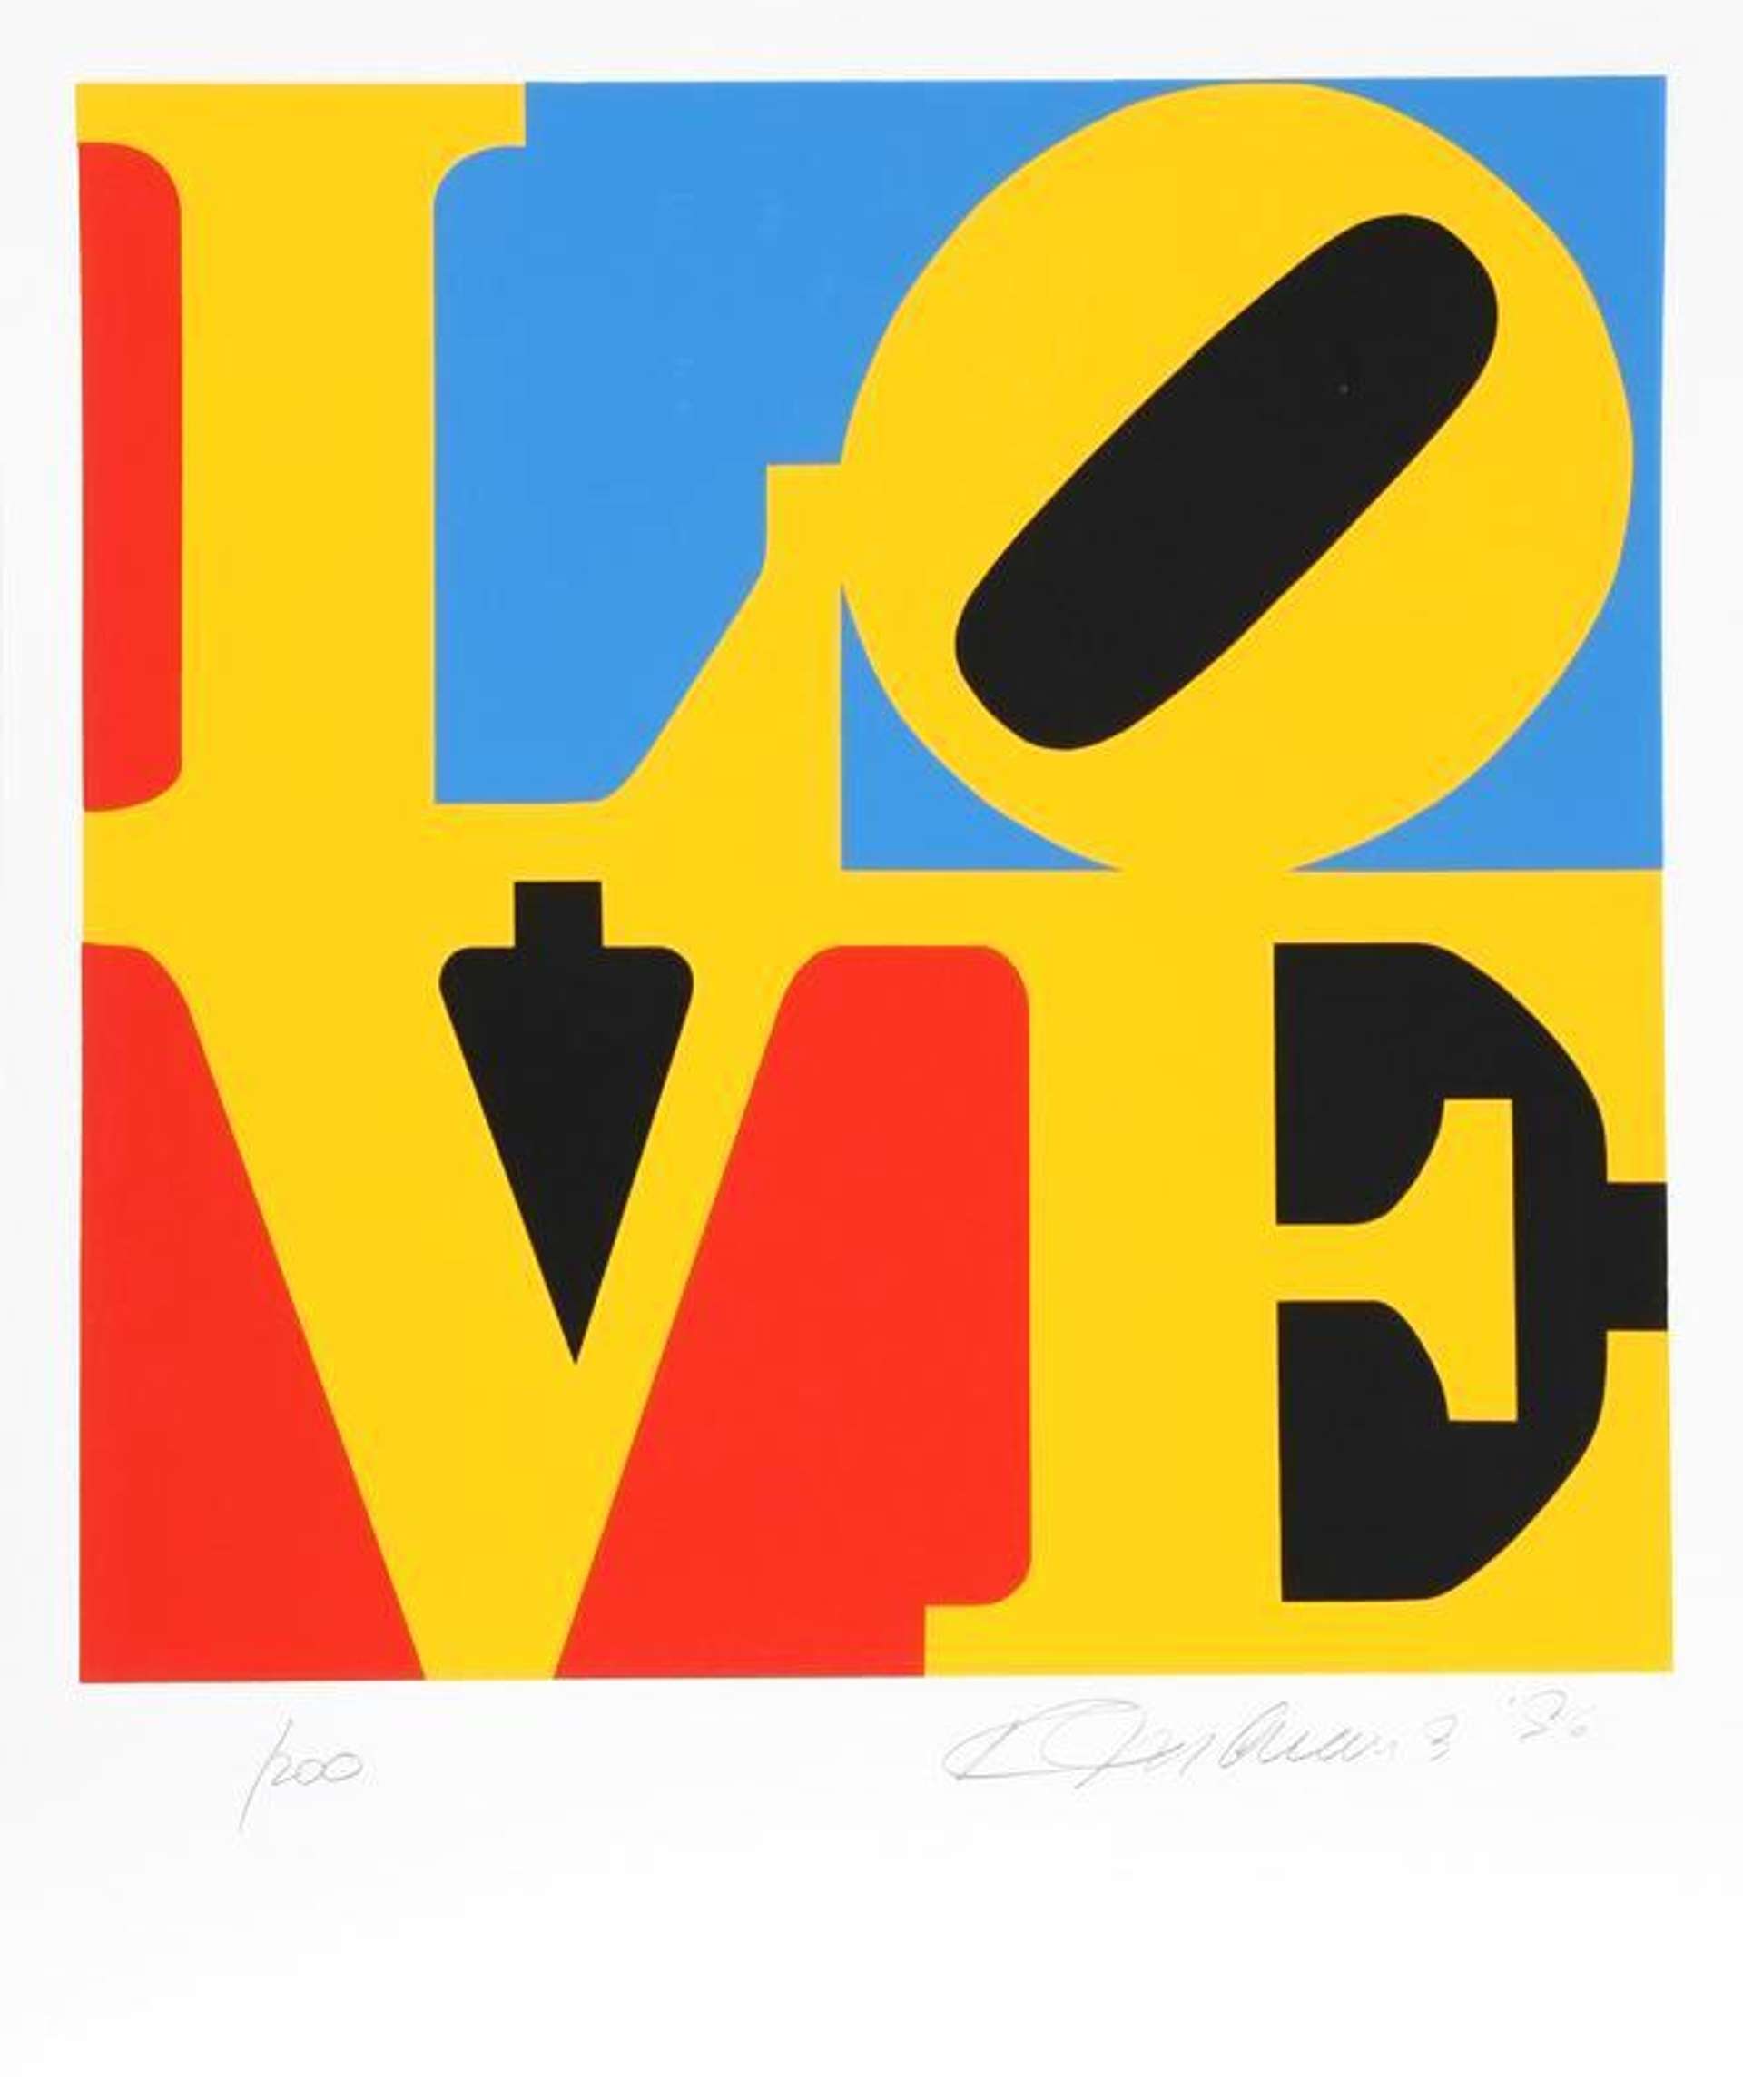 The Book Of Love (yellow, red and blue) - Signed Print by Robert Indiana 1996 - MyArtBroker